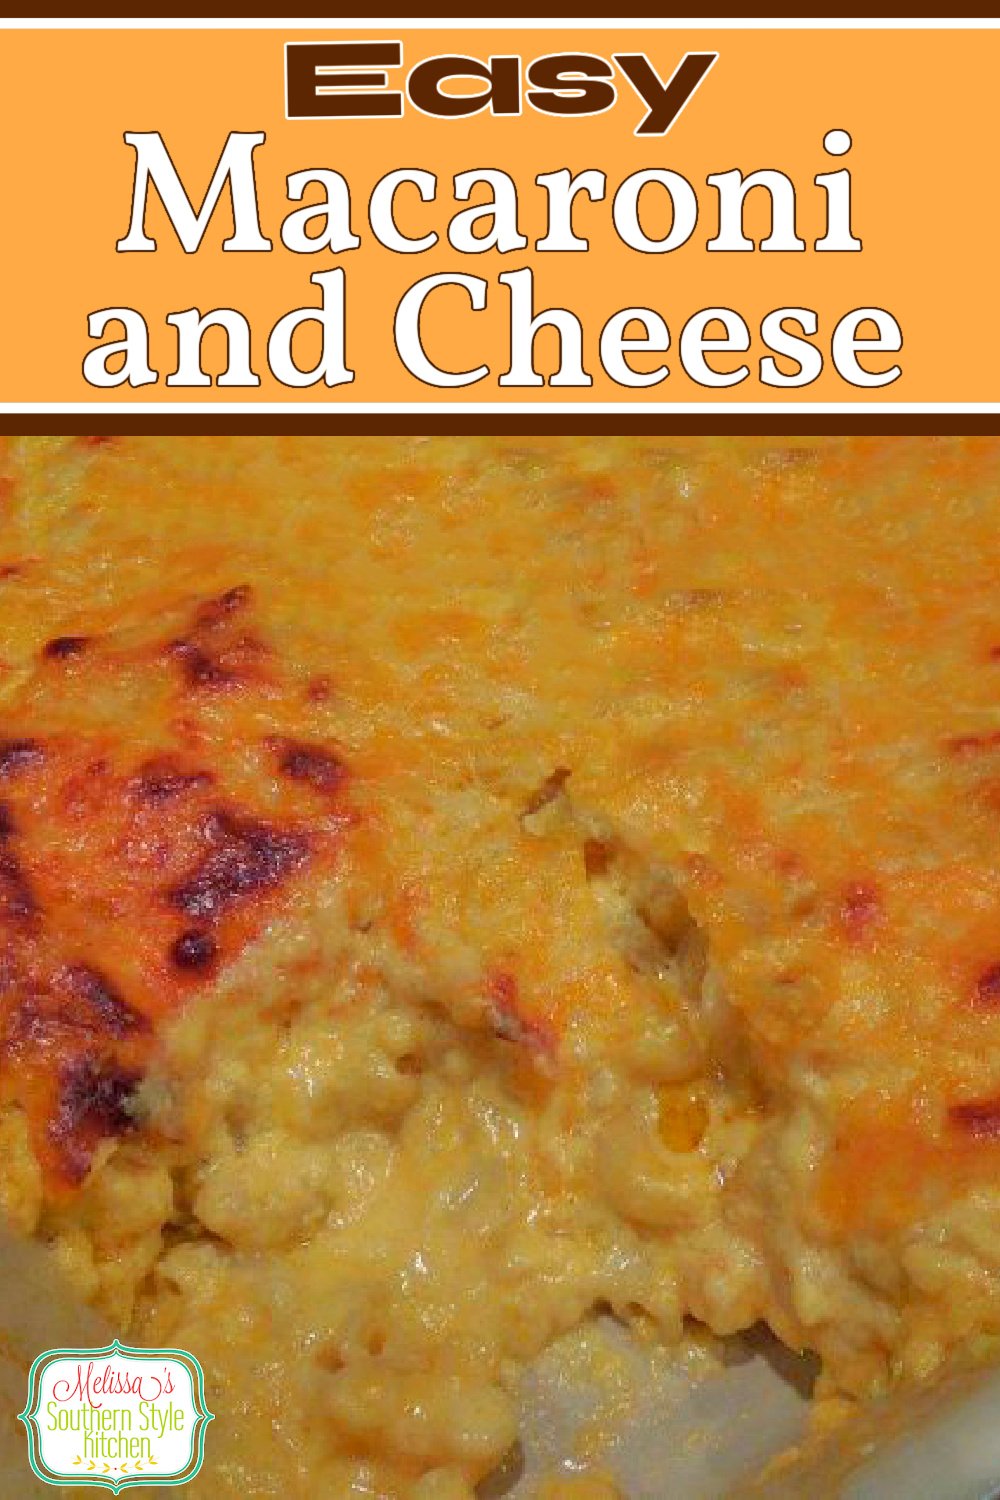 There's no wrong time of year to enjoy a heaping helping of this easy Southern Style Macaroni and Cheese #macaroniandcheese #cheddarcheese #macaroni #pasta #casseroles #macandcheese #holidaysidedishes #dinner #dinnerideas #southernfood #southernrecipes via @melissasssk